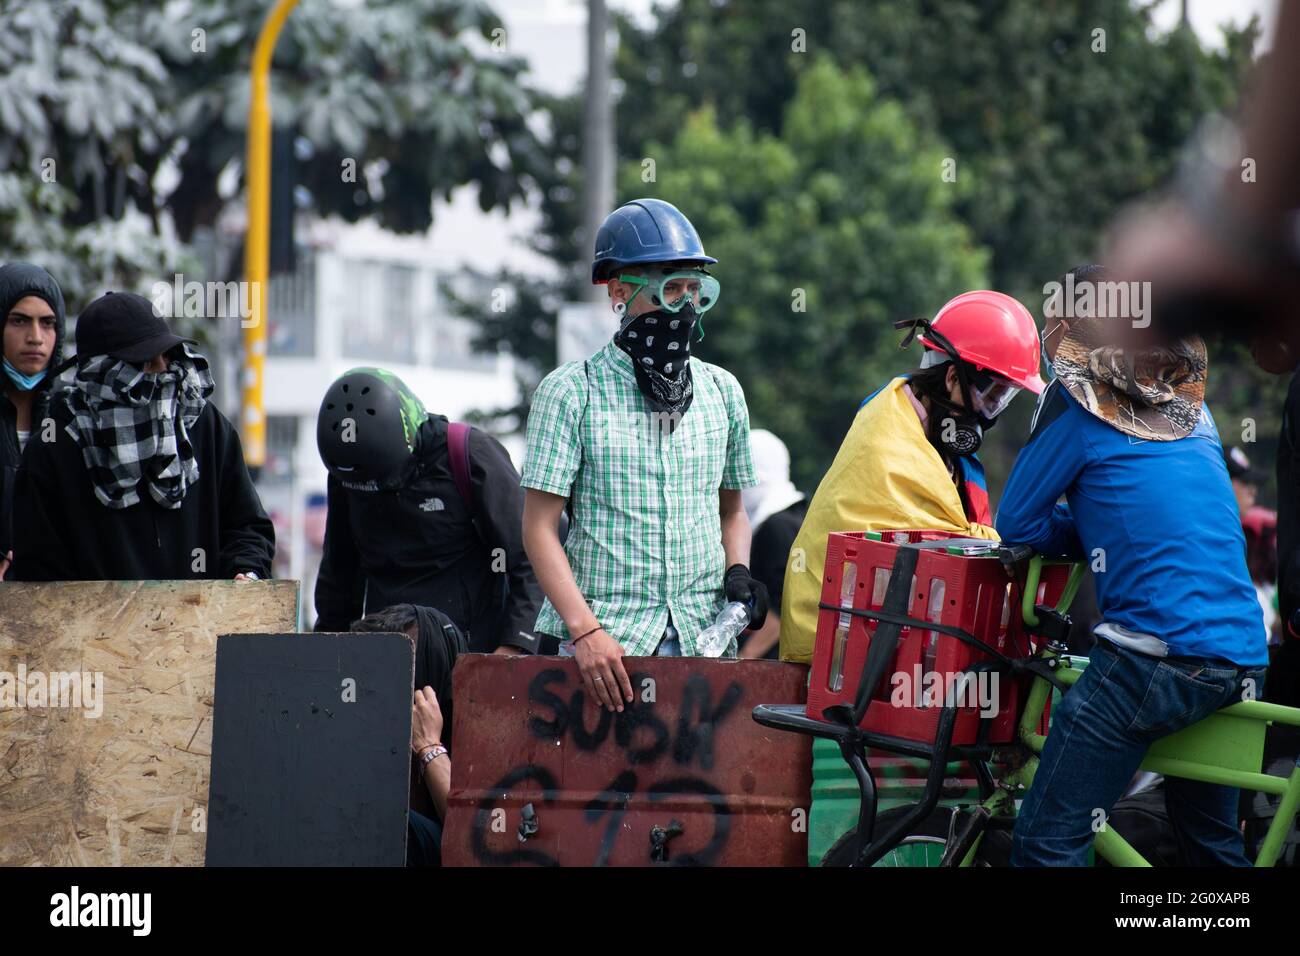 Bogota, Colombia. 02nd June, 2021. members of the so-called front line hold shields on a new day of anti-government protest in Bogotá, Colombia against the government of President Iván Duque and police brutality on June 2, 2021 Credit: Long Visual Press/Alamy Live News Stock Photo